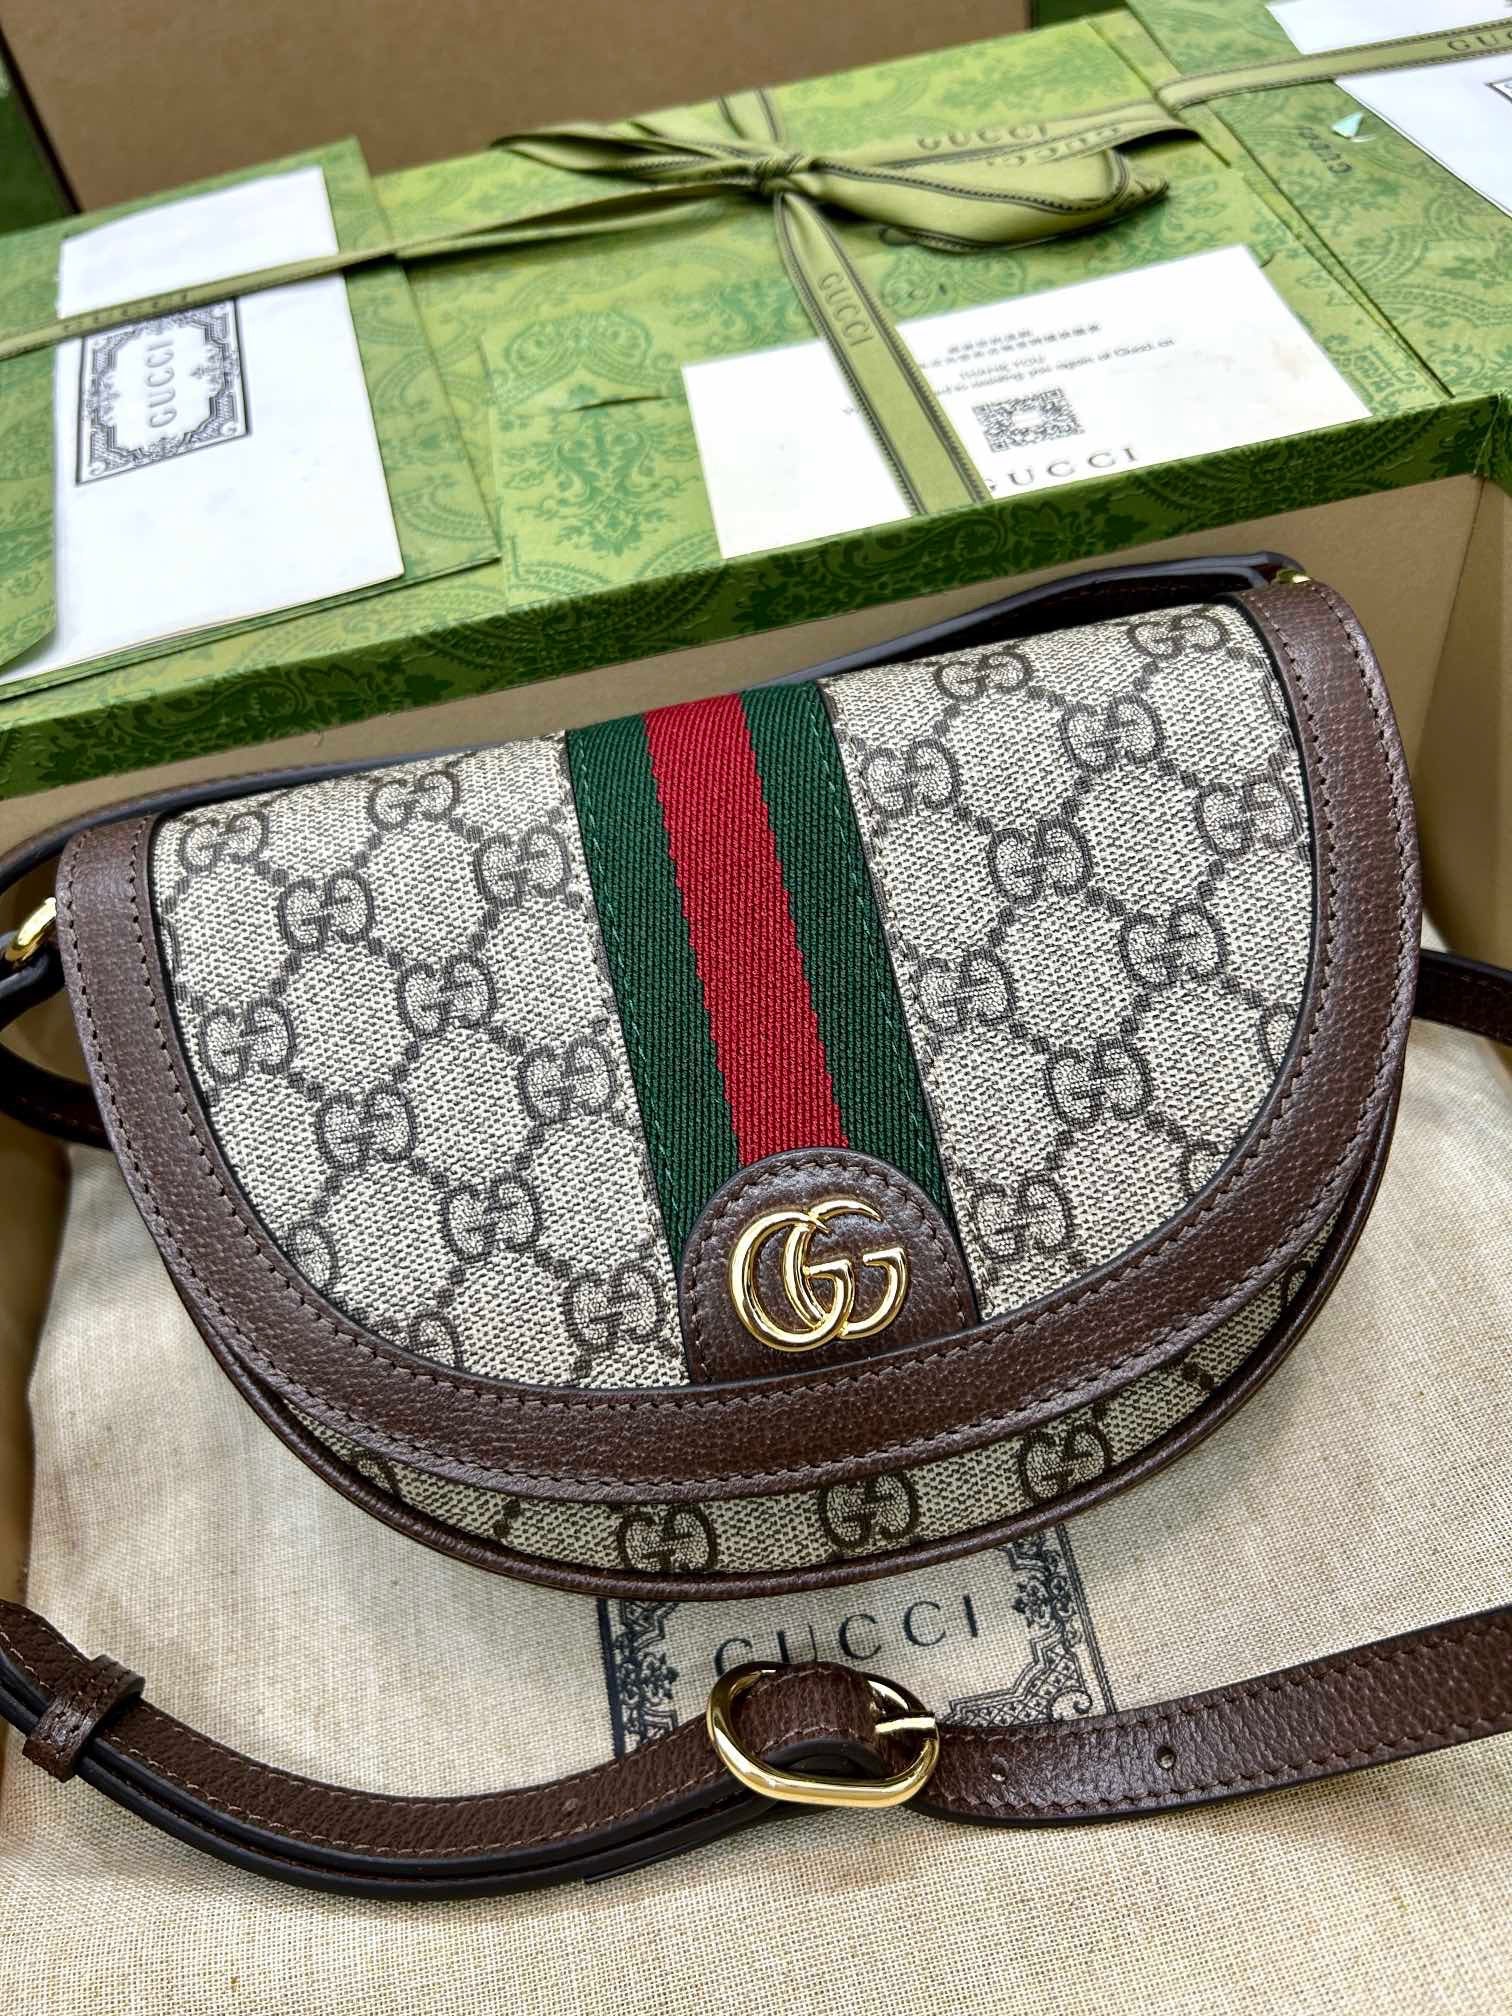 How to style GUCCI mini Ophidia GG Shoulder Bag 